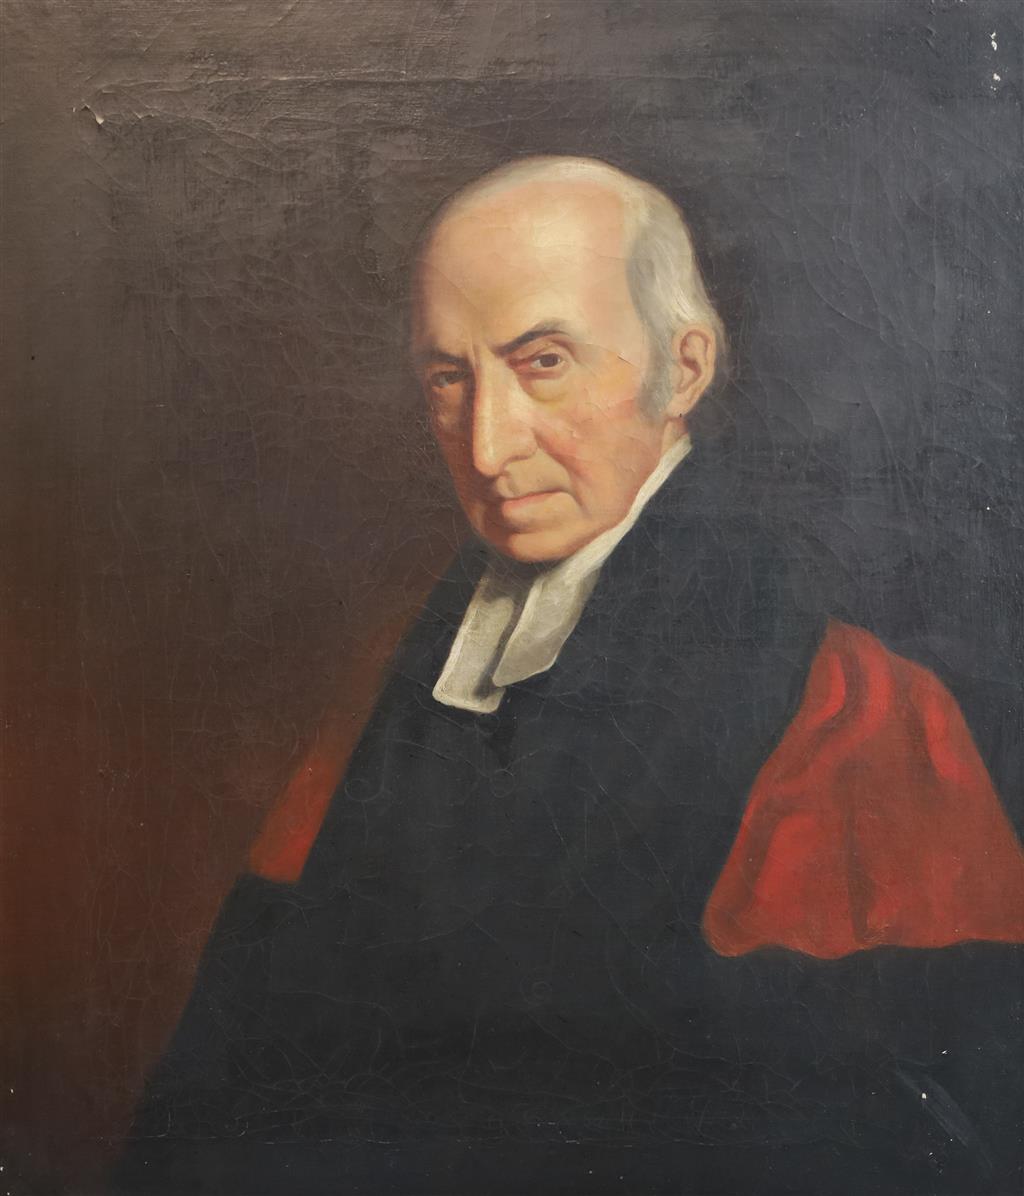 Early 19th century English School, oil on canvas, Portrait of a cleric, 75 x 62cm